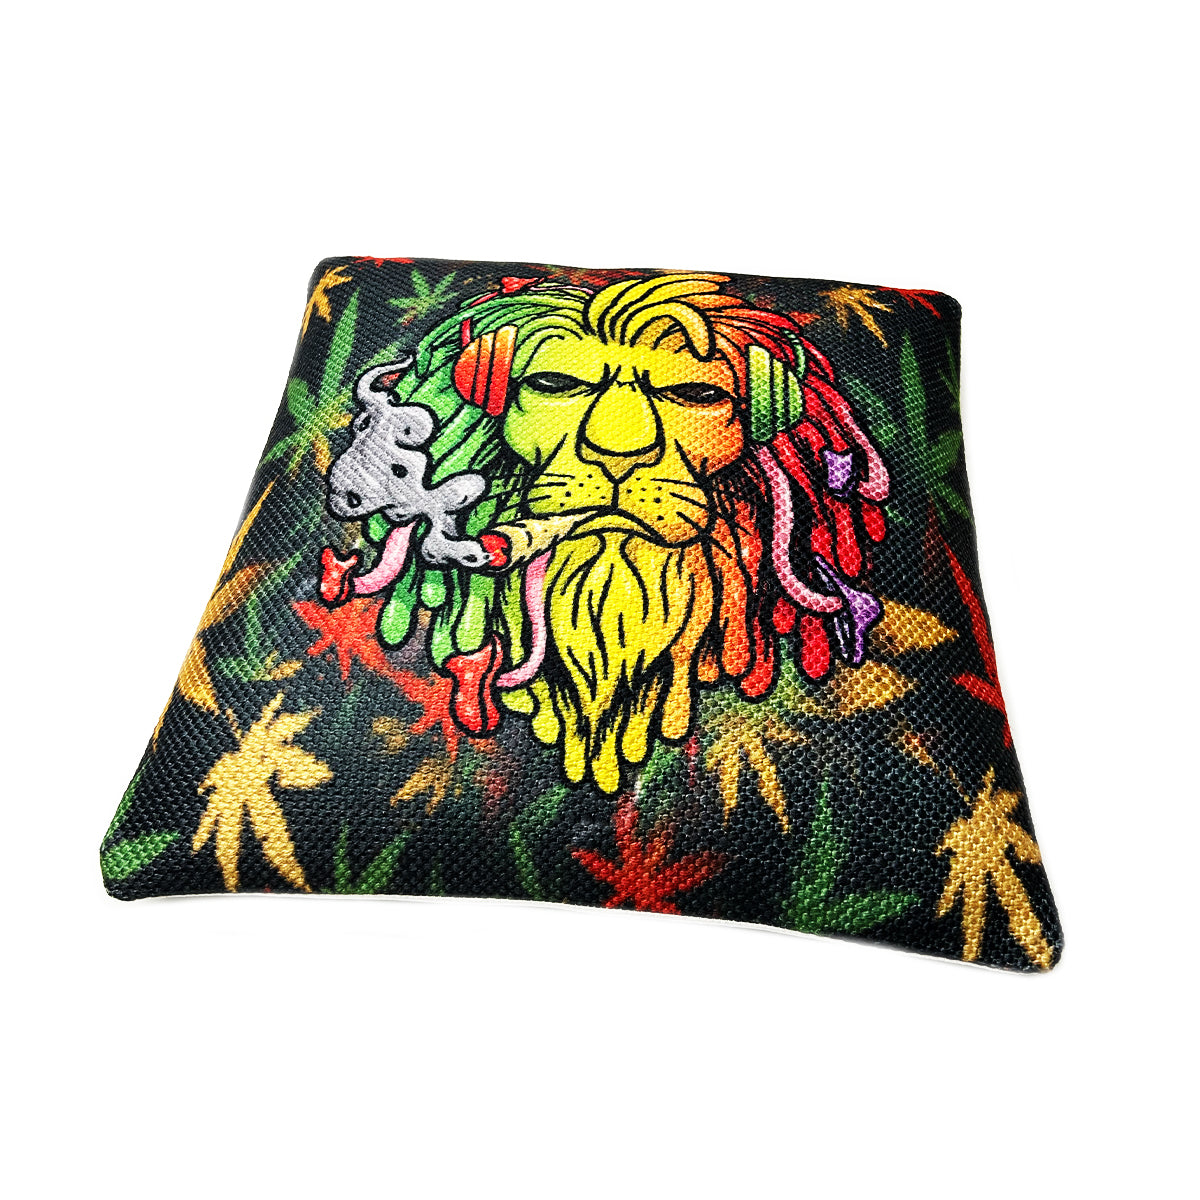 Handloom Lion Printed Cushions Size 1.5ft x 1.5ft